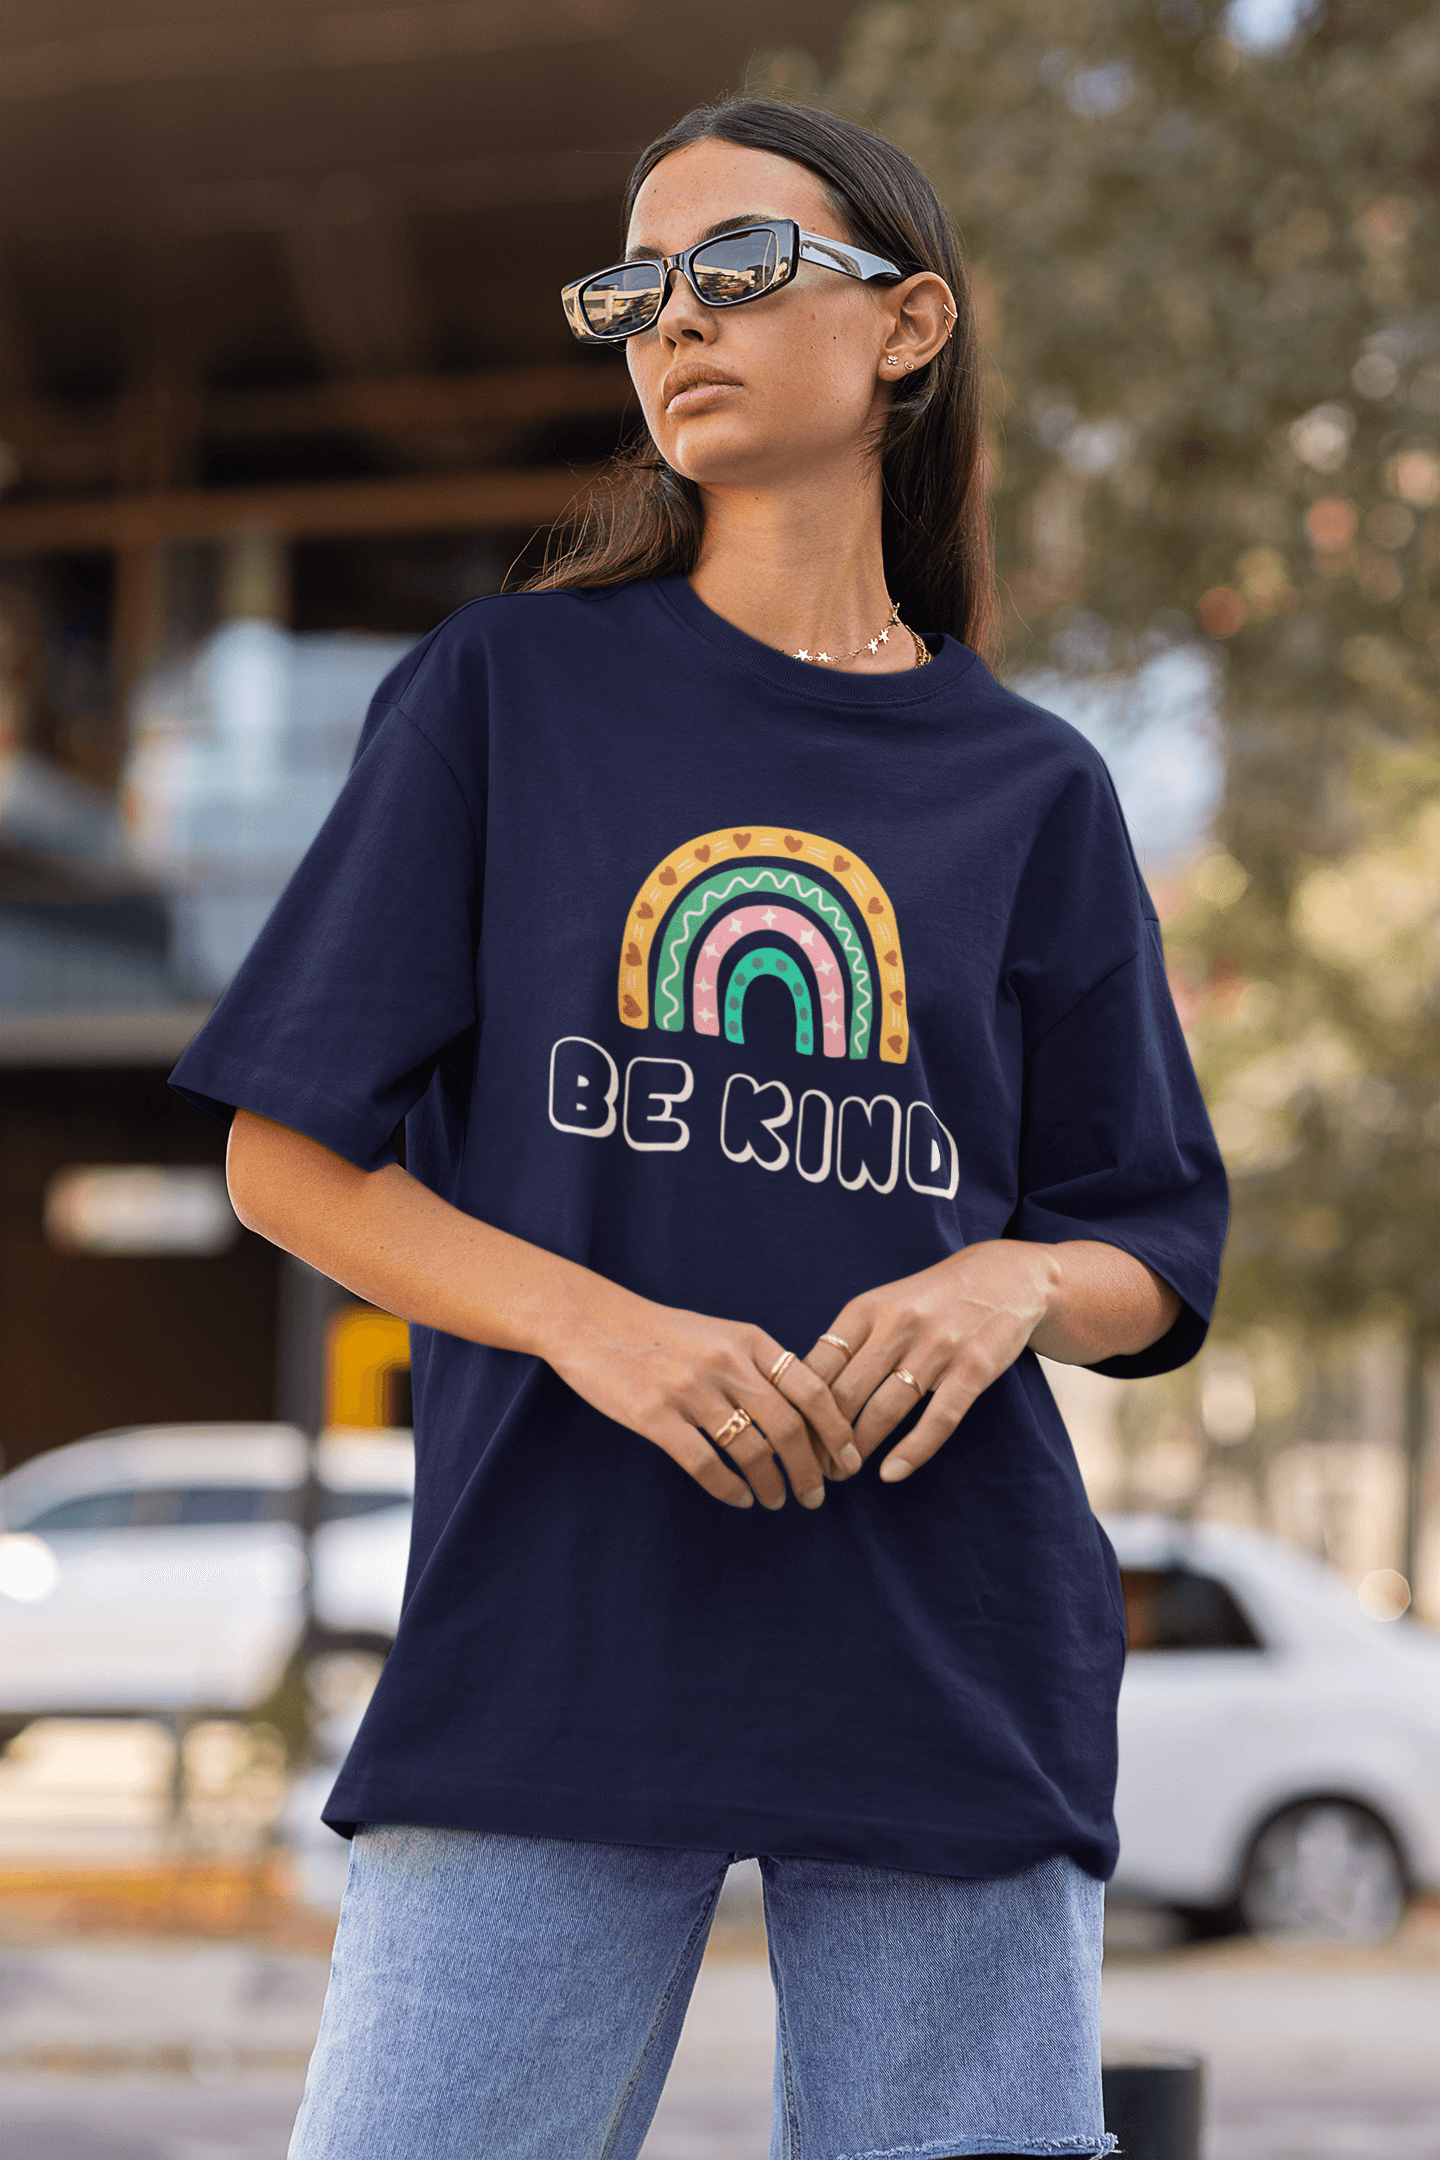 Be kind Over-size Tees- Unisex - Cute Stuff India